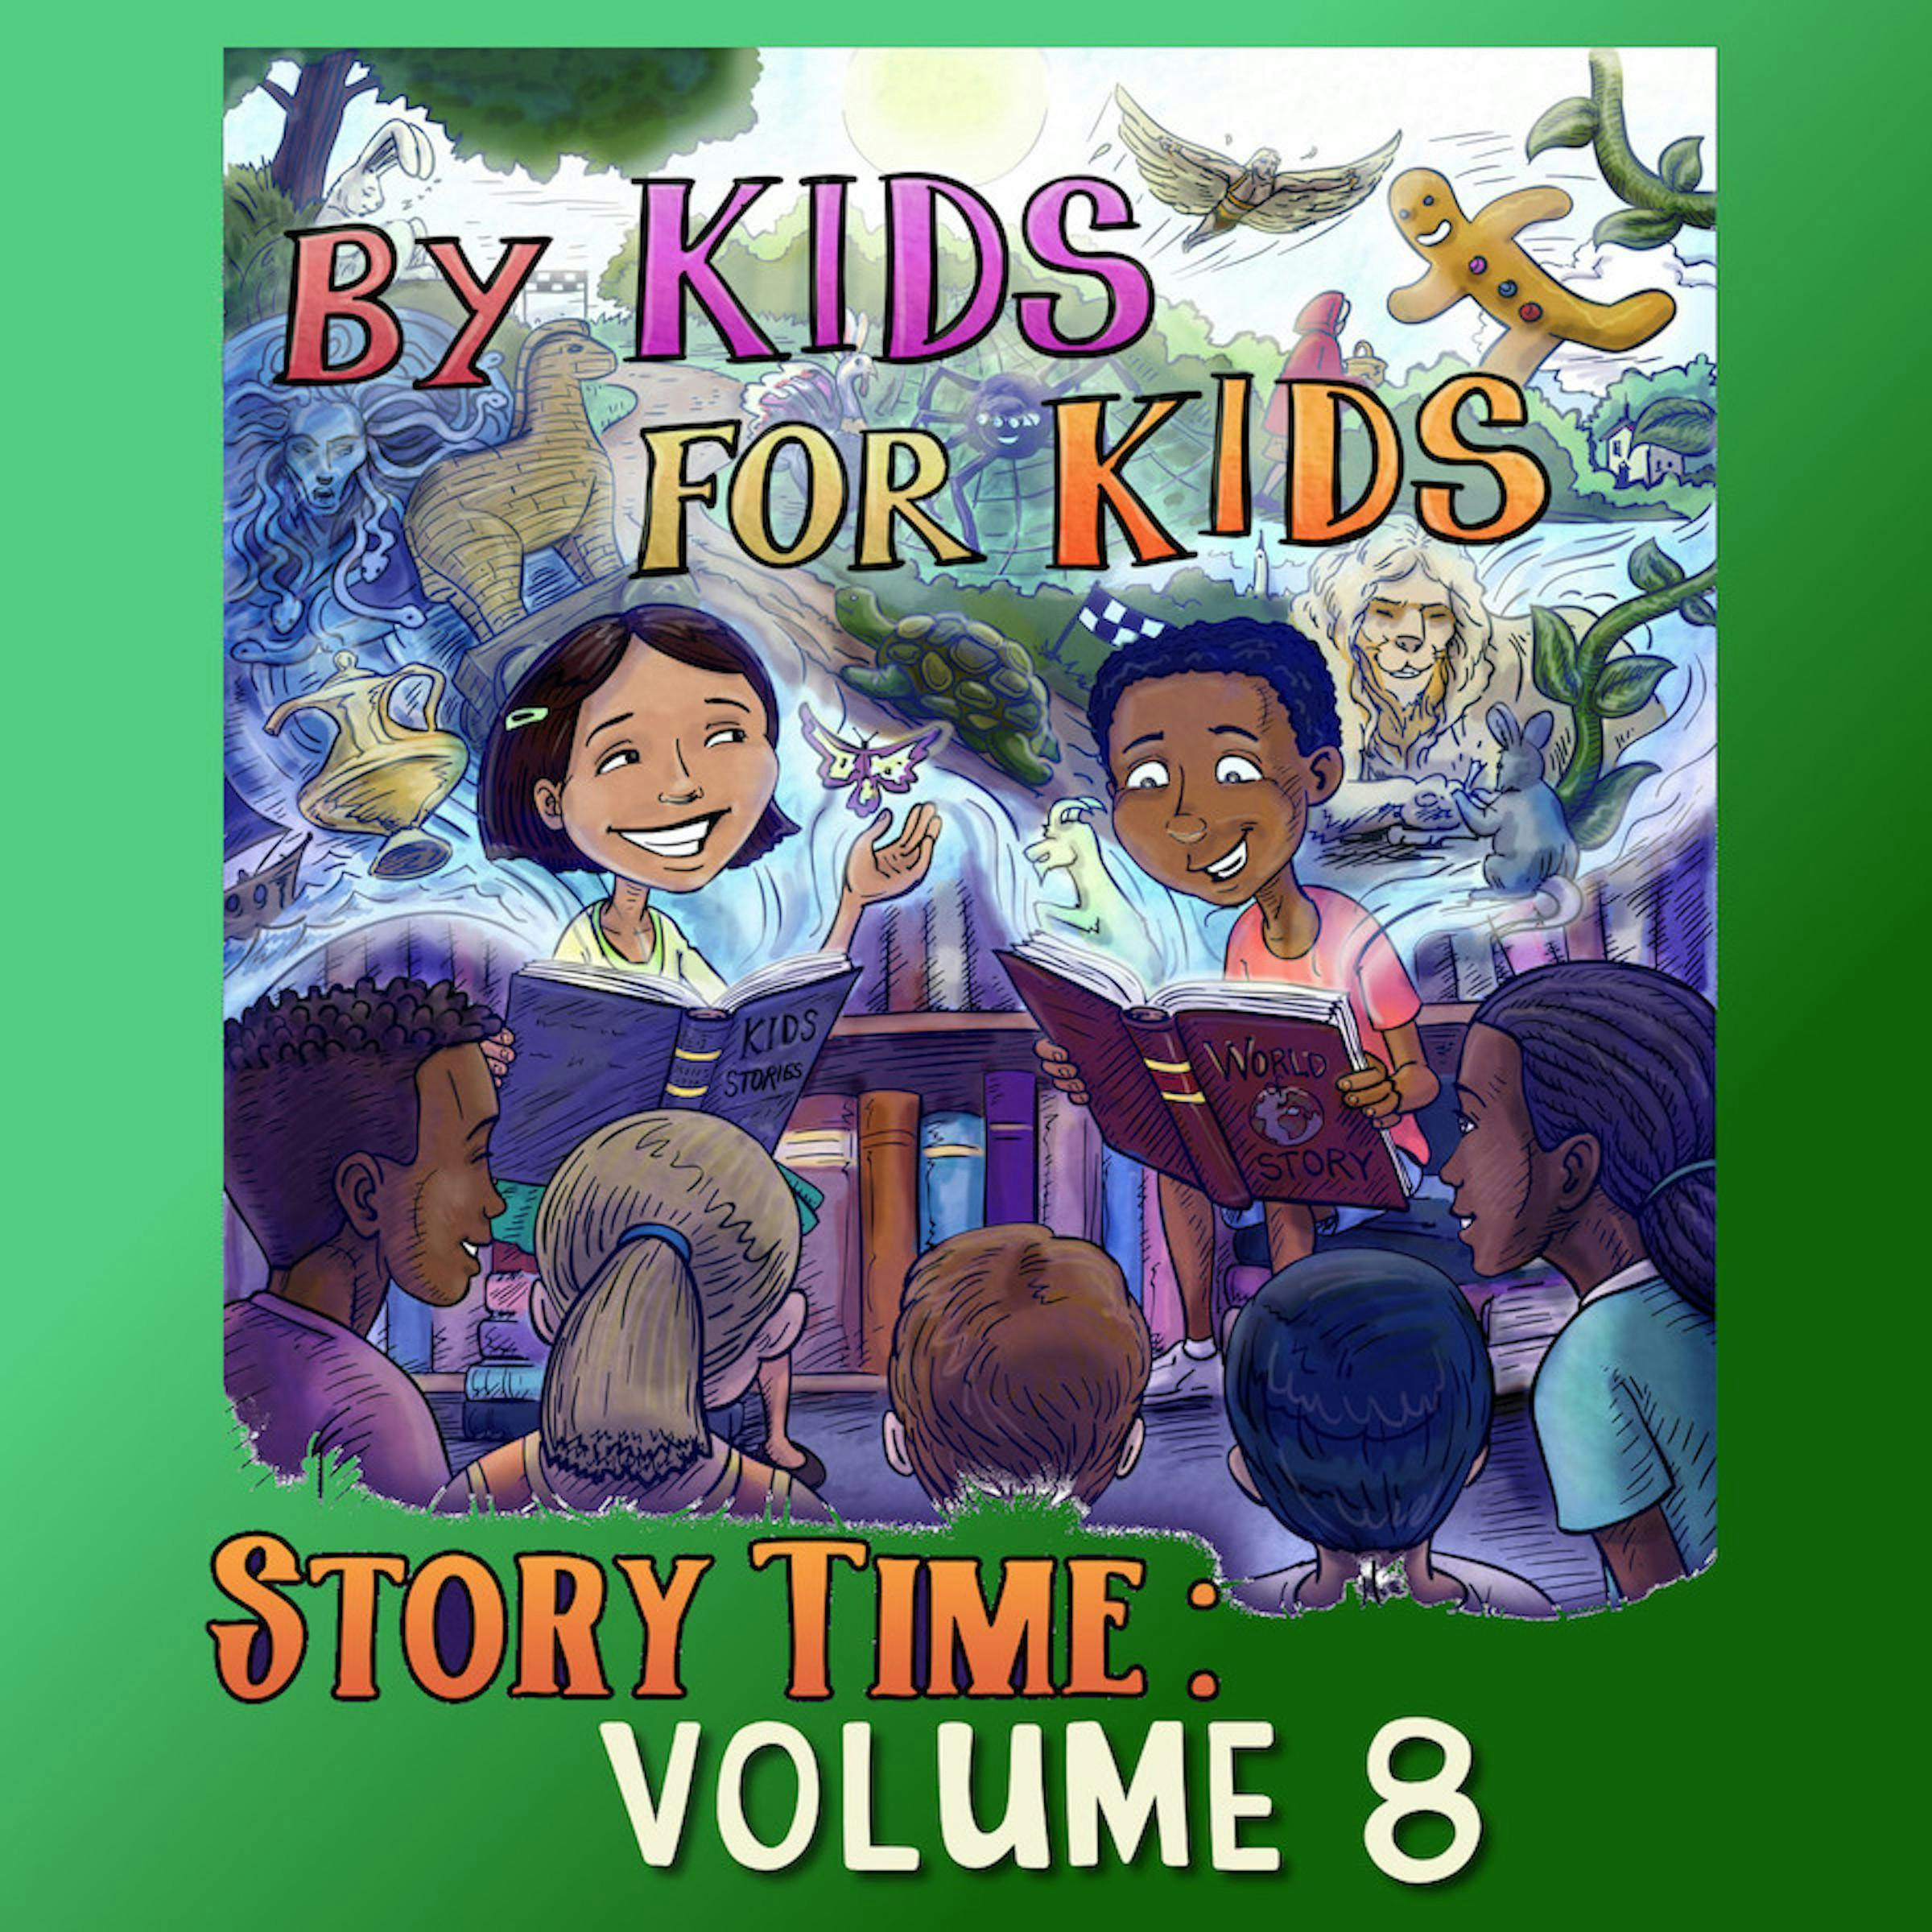 By Kids For Kids Story Time: Volume 08 - By Kids For Kids Story Time